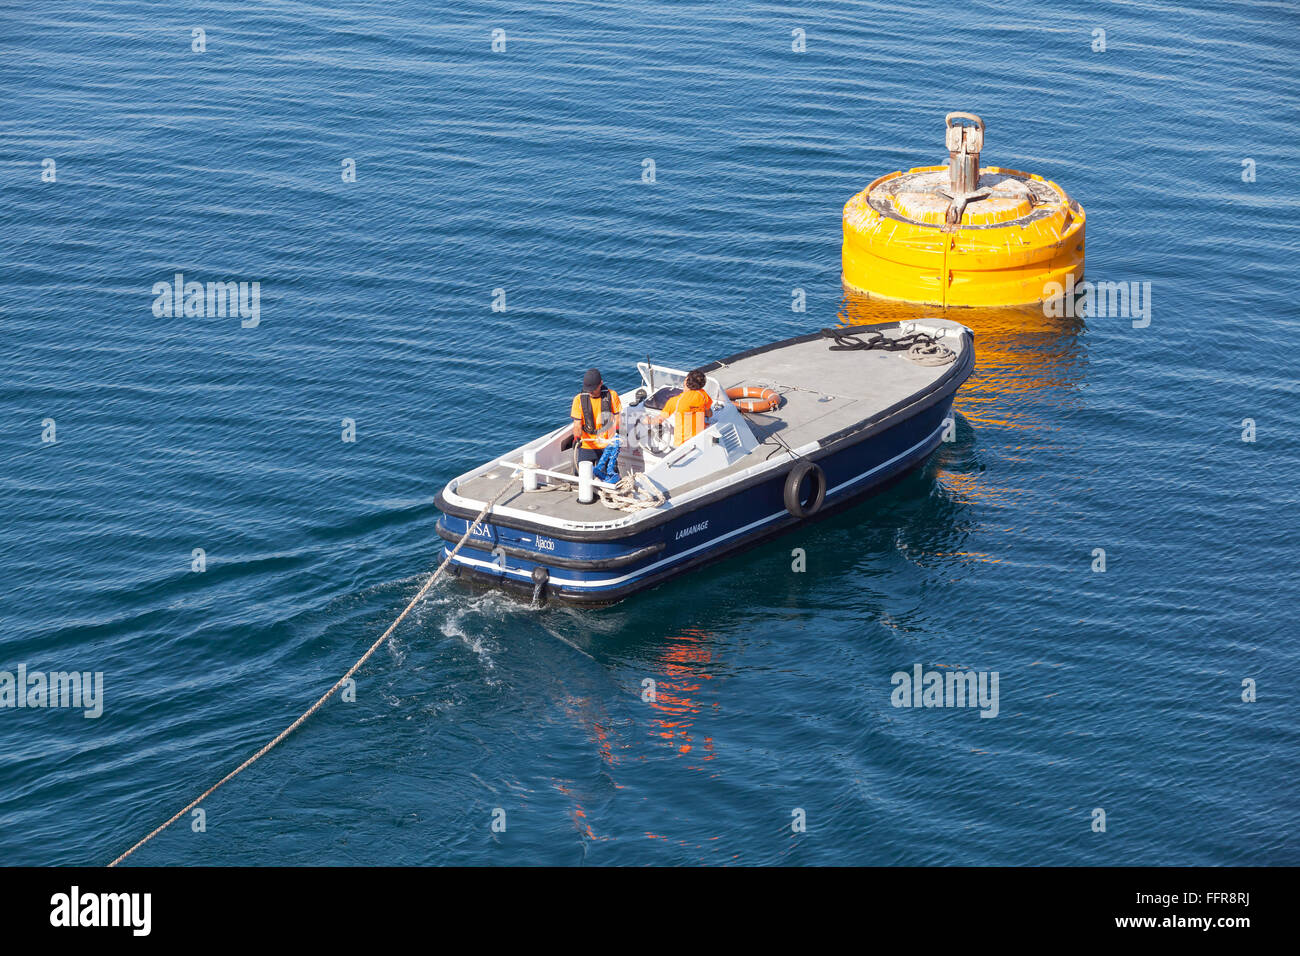 Ajaccio, France - June 30, 2015: Port operations, men at work. Motorboat is used for rope connection on yellow mooring buoy Stock Photo